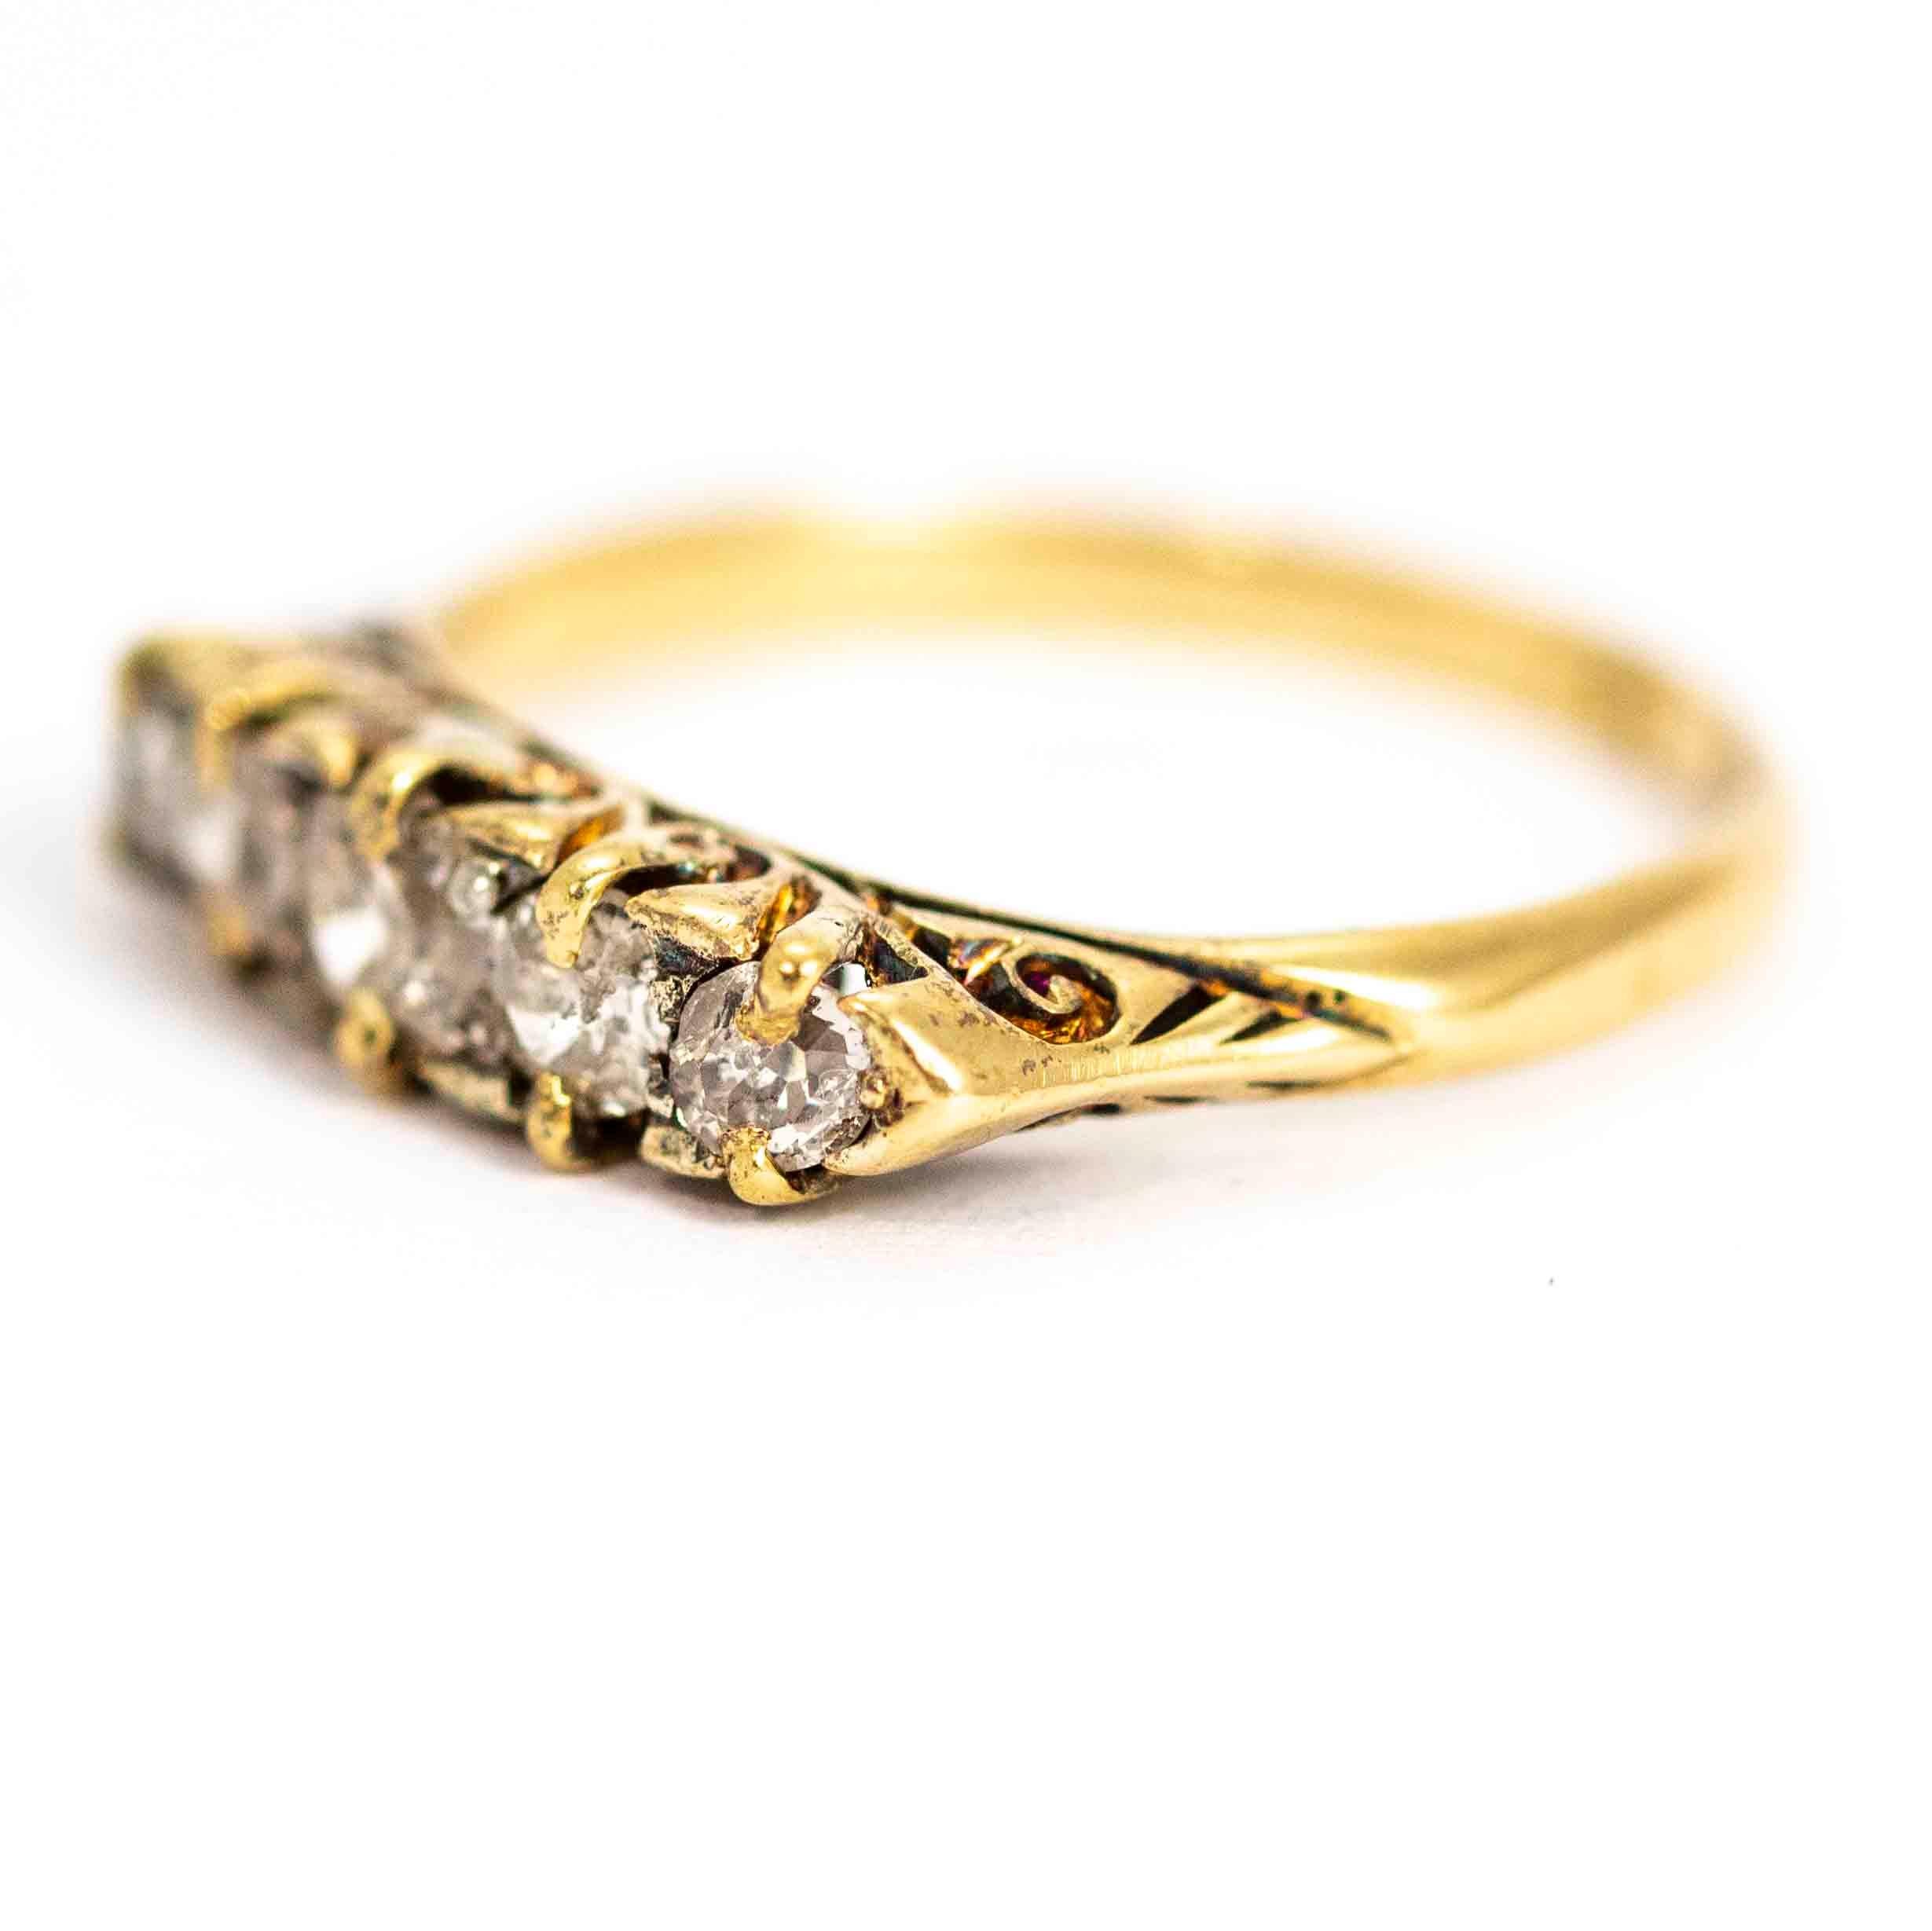 A stunning vintage five-stone ring set with diamonds. The central stone measures approximately 25 points. The total diamond weight in this ring is approximately 61 points. The stones are set in a beautiful classically ornate gallery. Modelled in 18